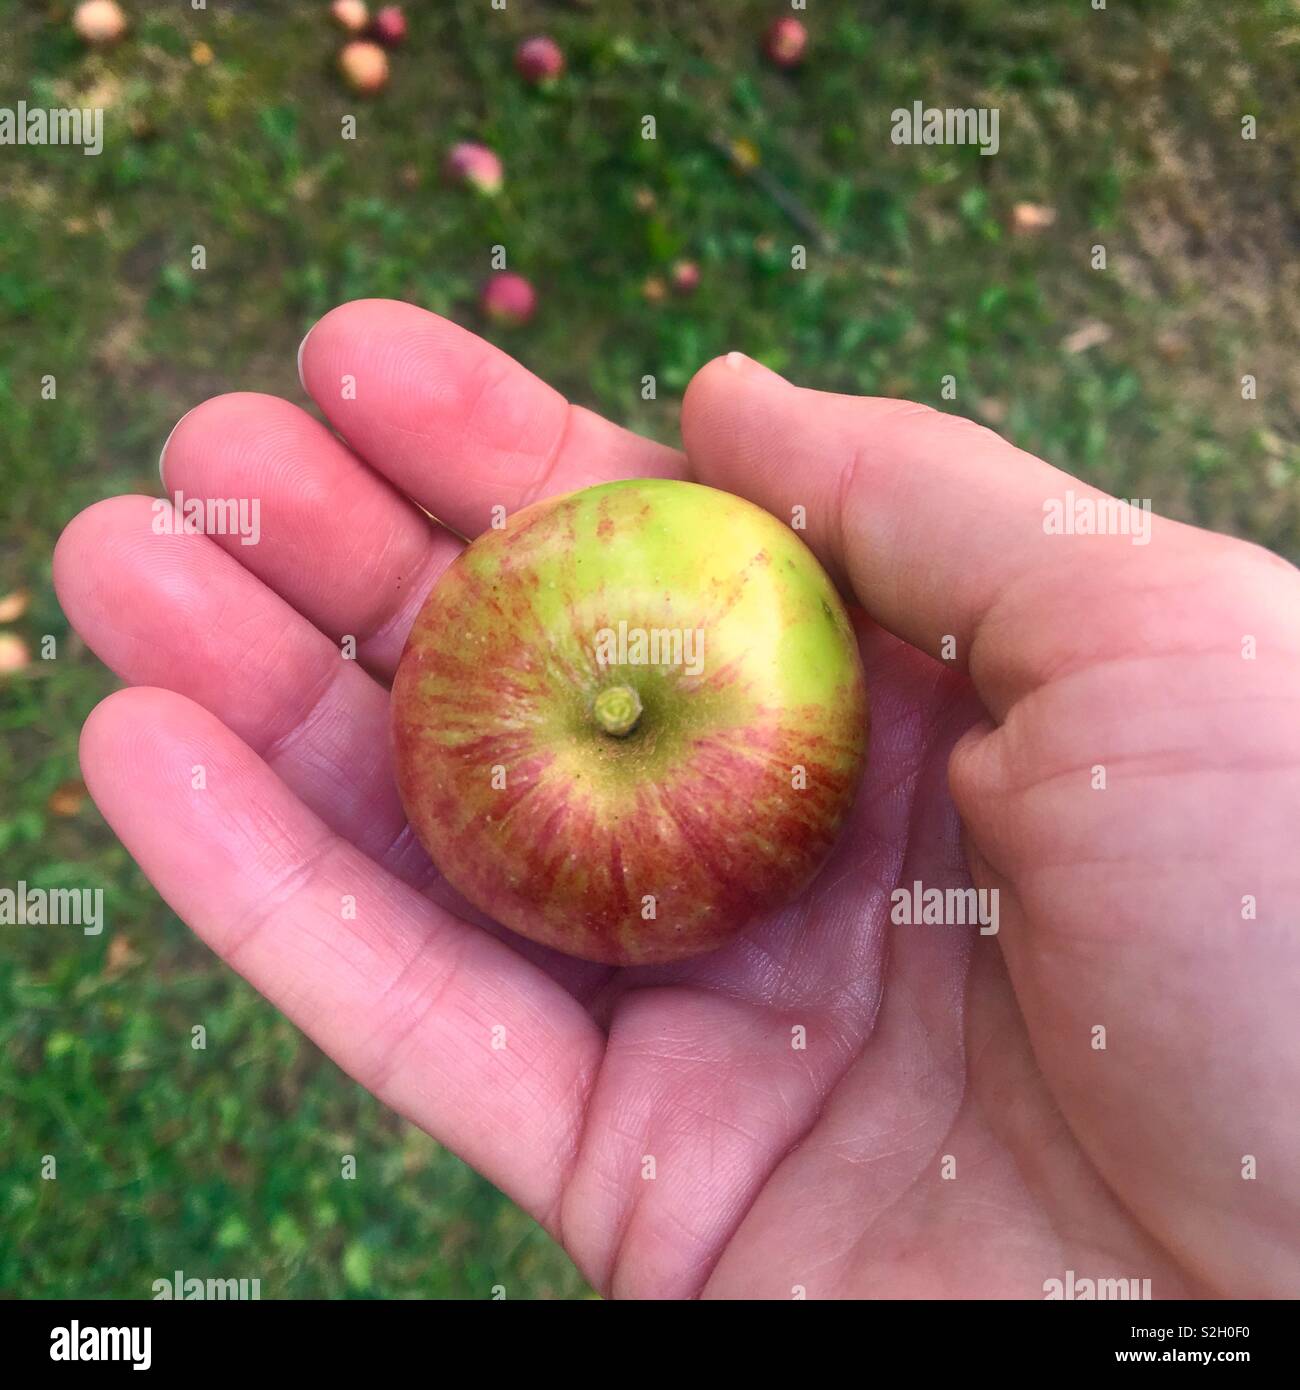 https://c8.alamy.com/comp/S2H0F0/tiny-organic-home-grown-apple-being-held-in-hand-S2H0F0.jpg